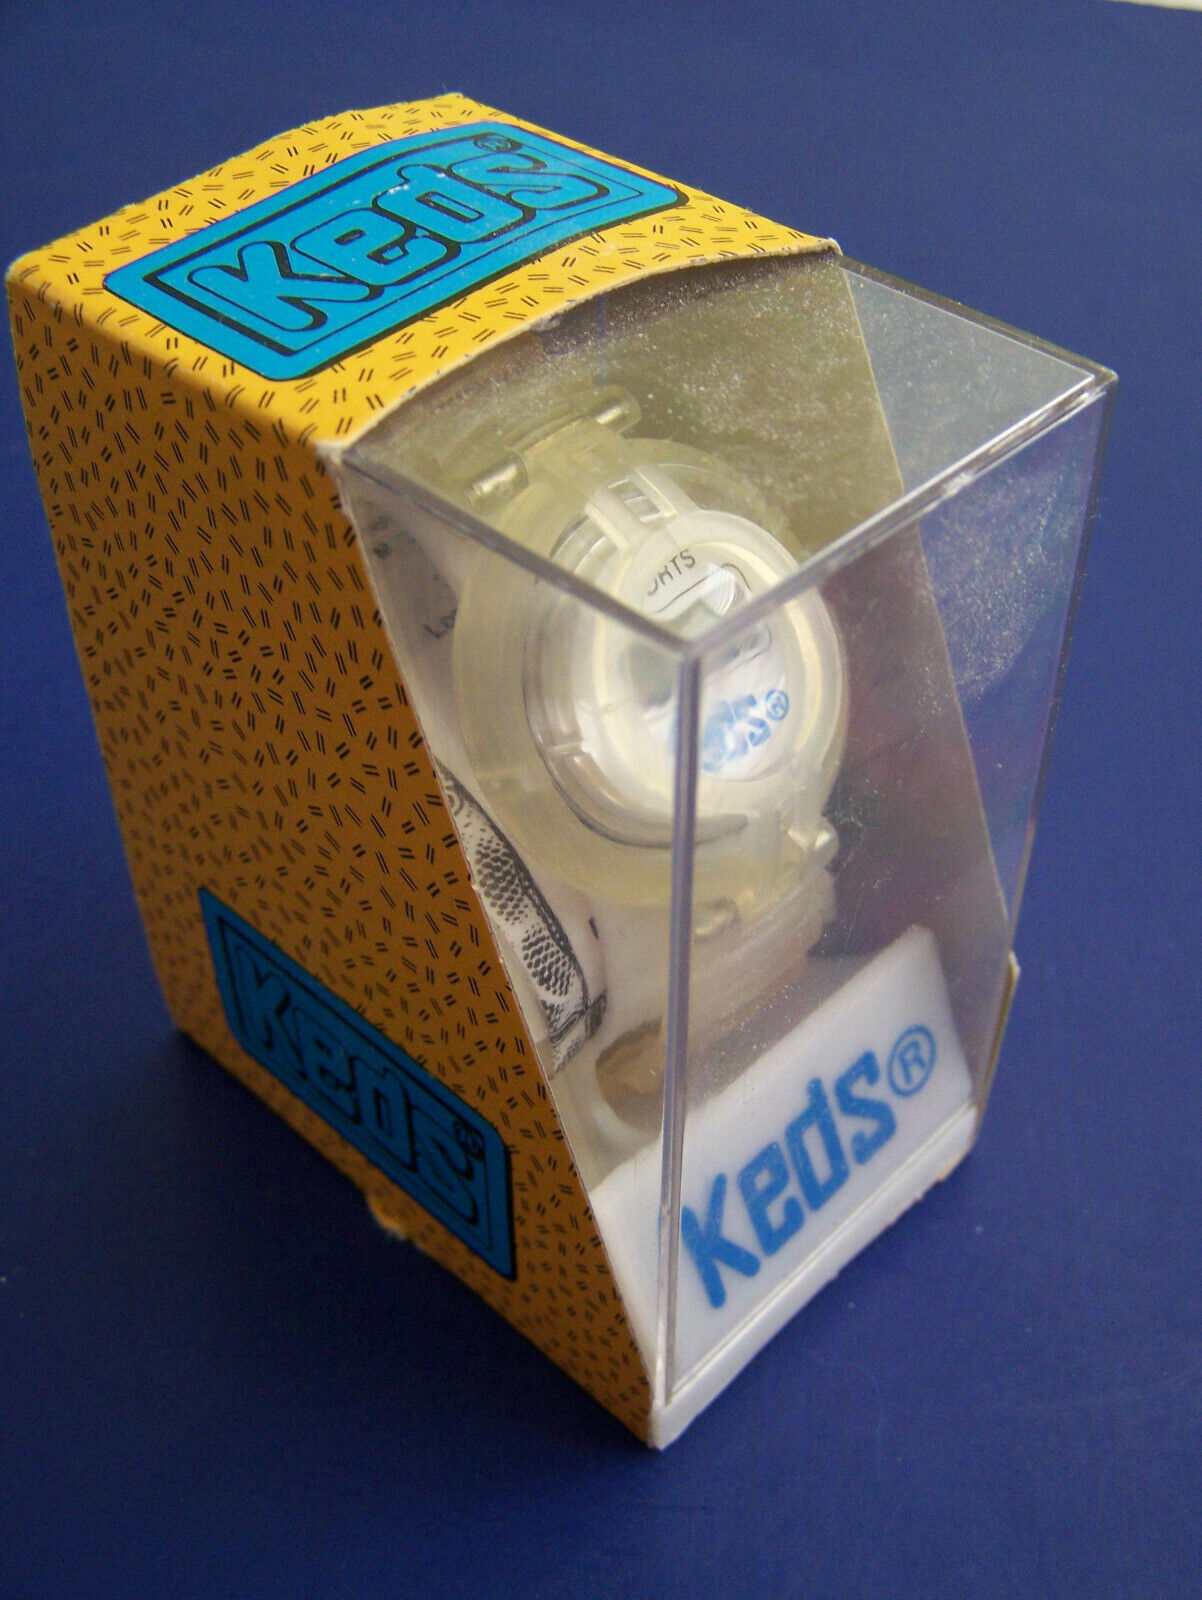 1997 COLLECTIBLE VINTAGE KEDS SPORTS SNEAKERS NOVELTY WATCH NIB w / PAPERS & BOX